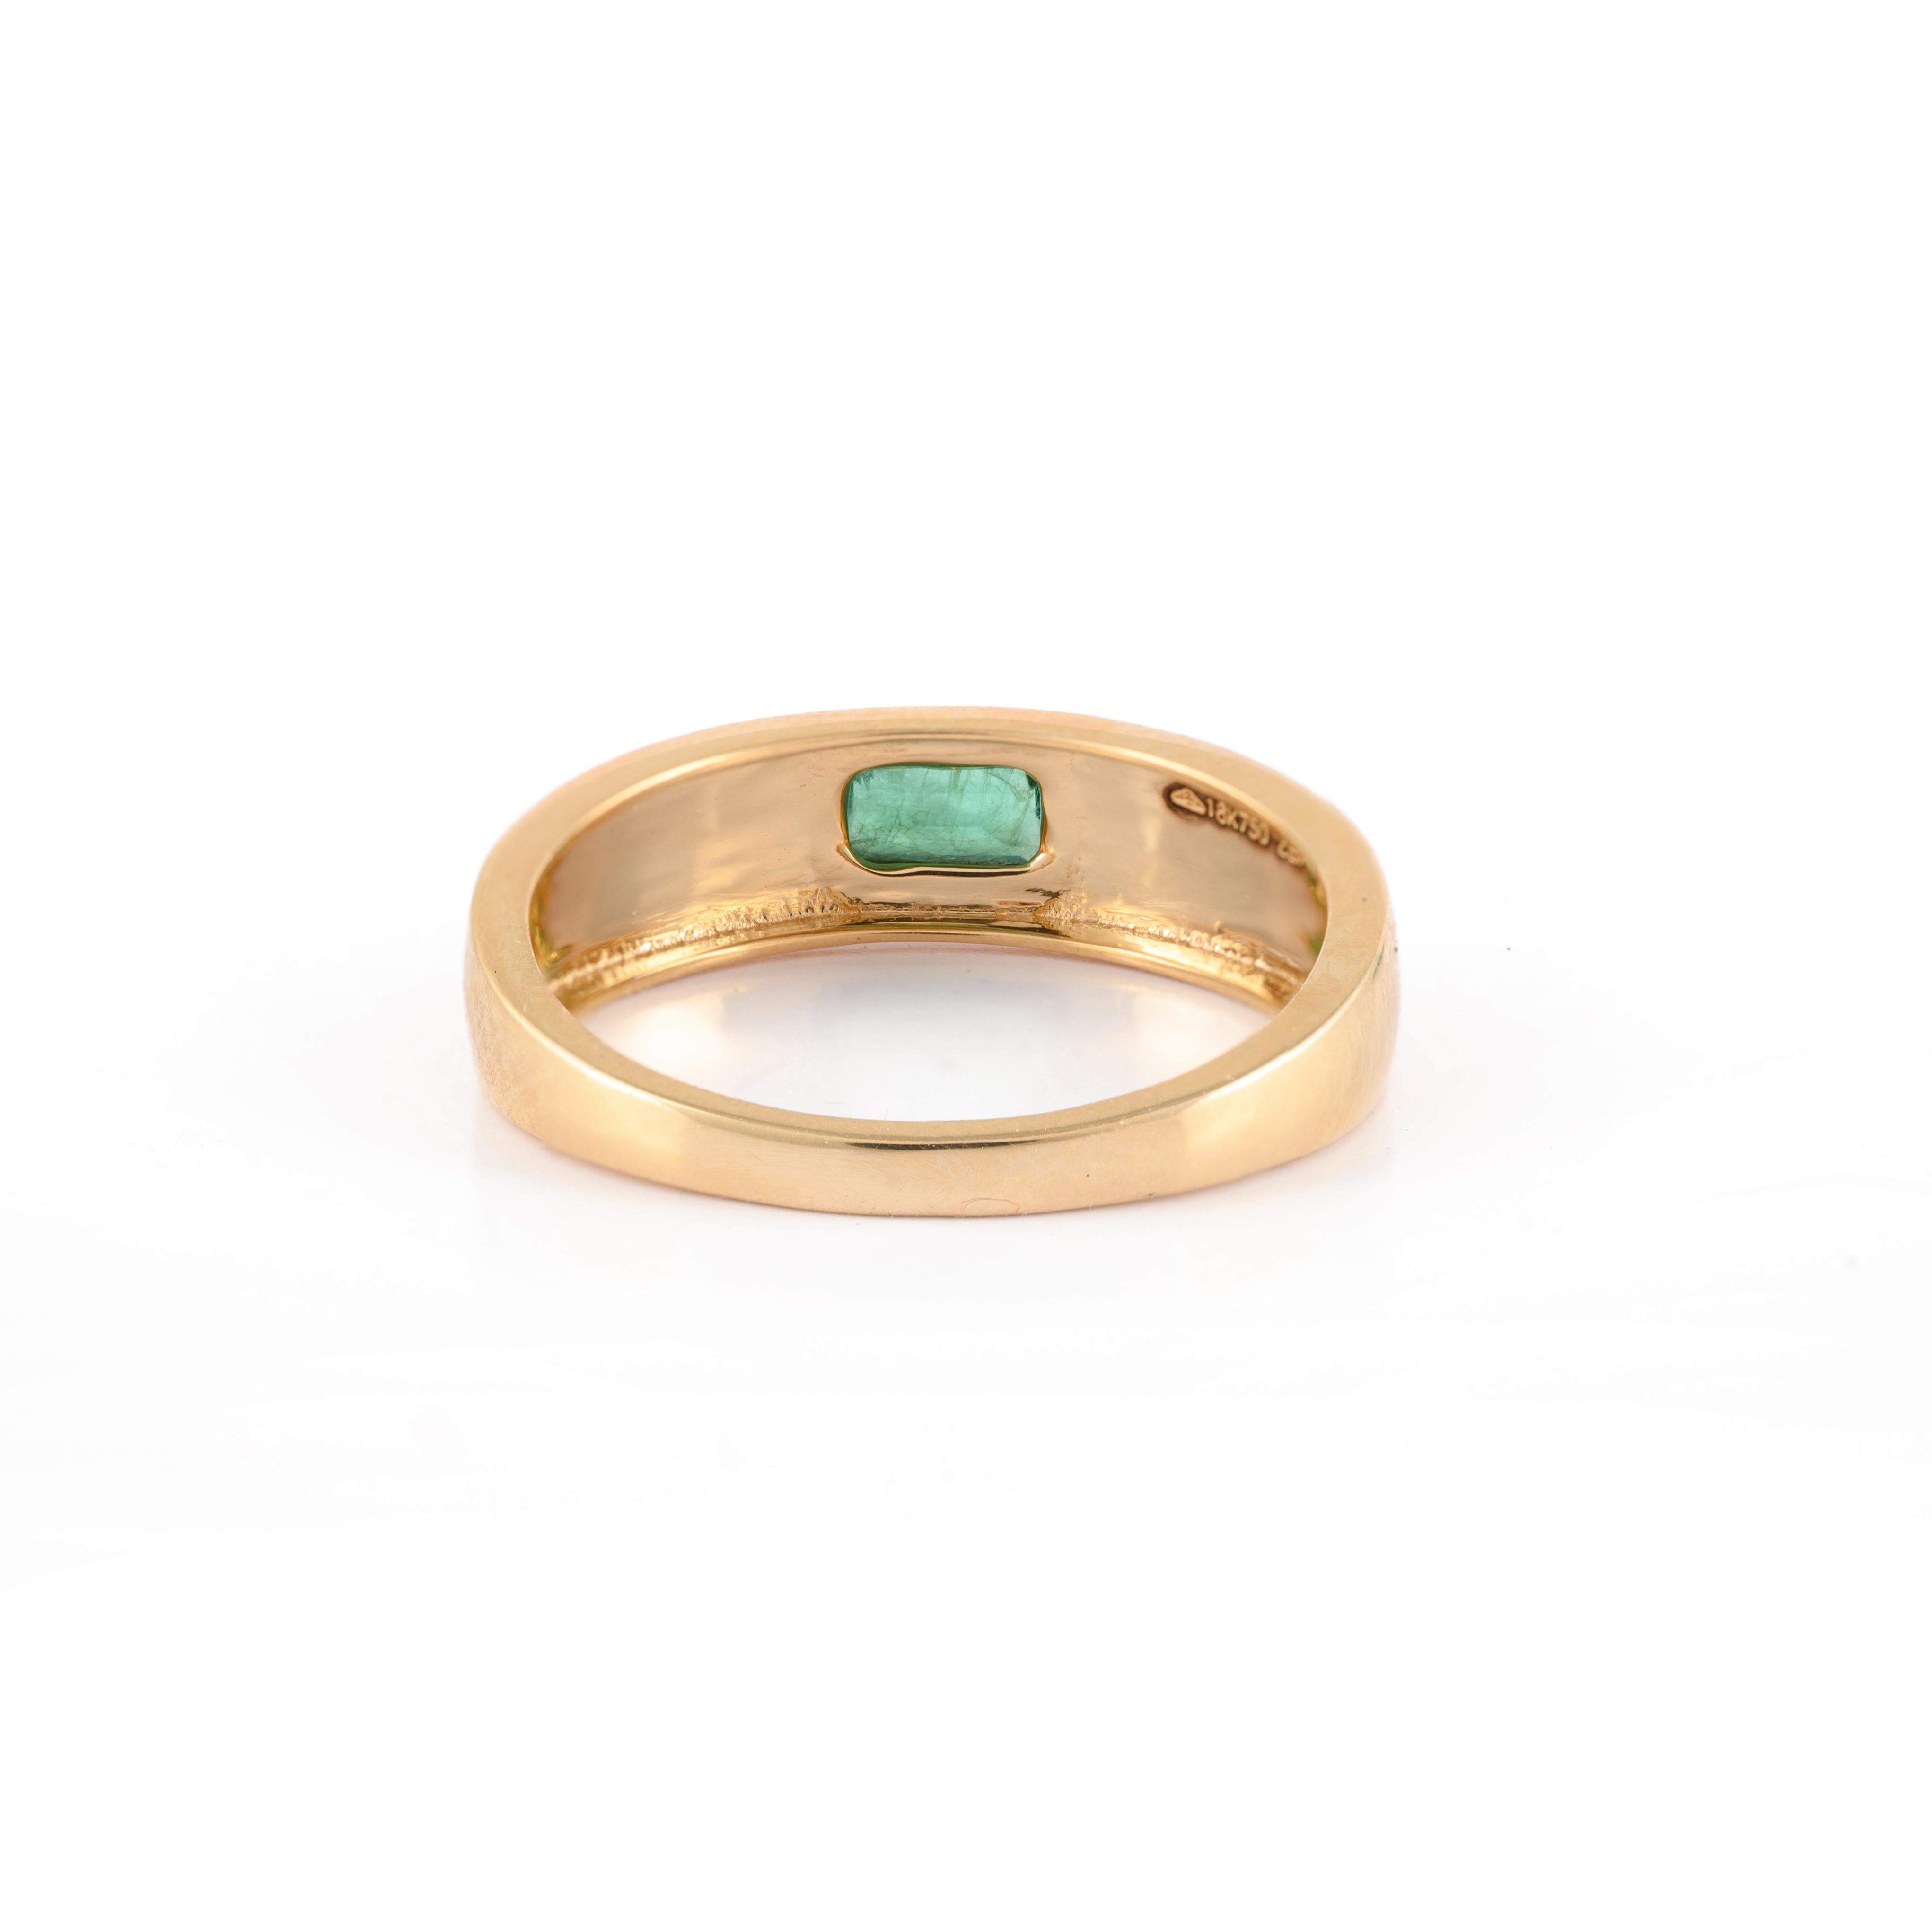 For Sale:  Unisex 18 Karat Solid Yellow Gold Natural Baguette Cut Emerald Ring 6